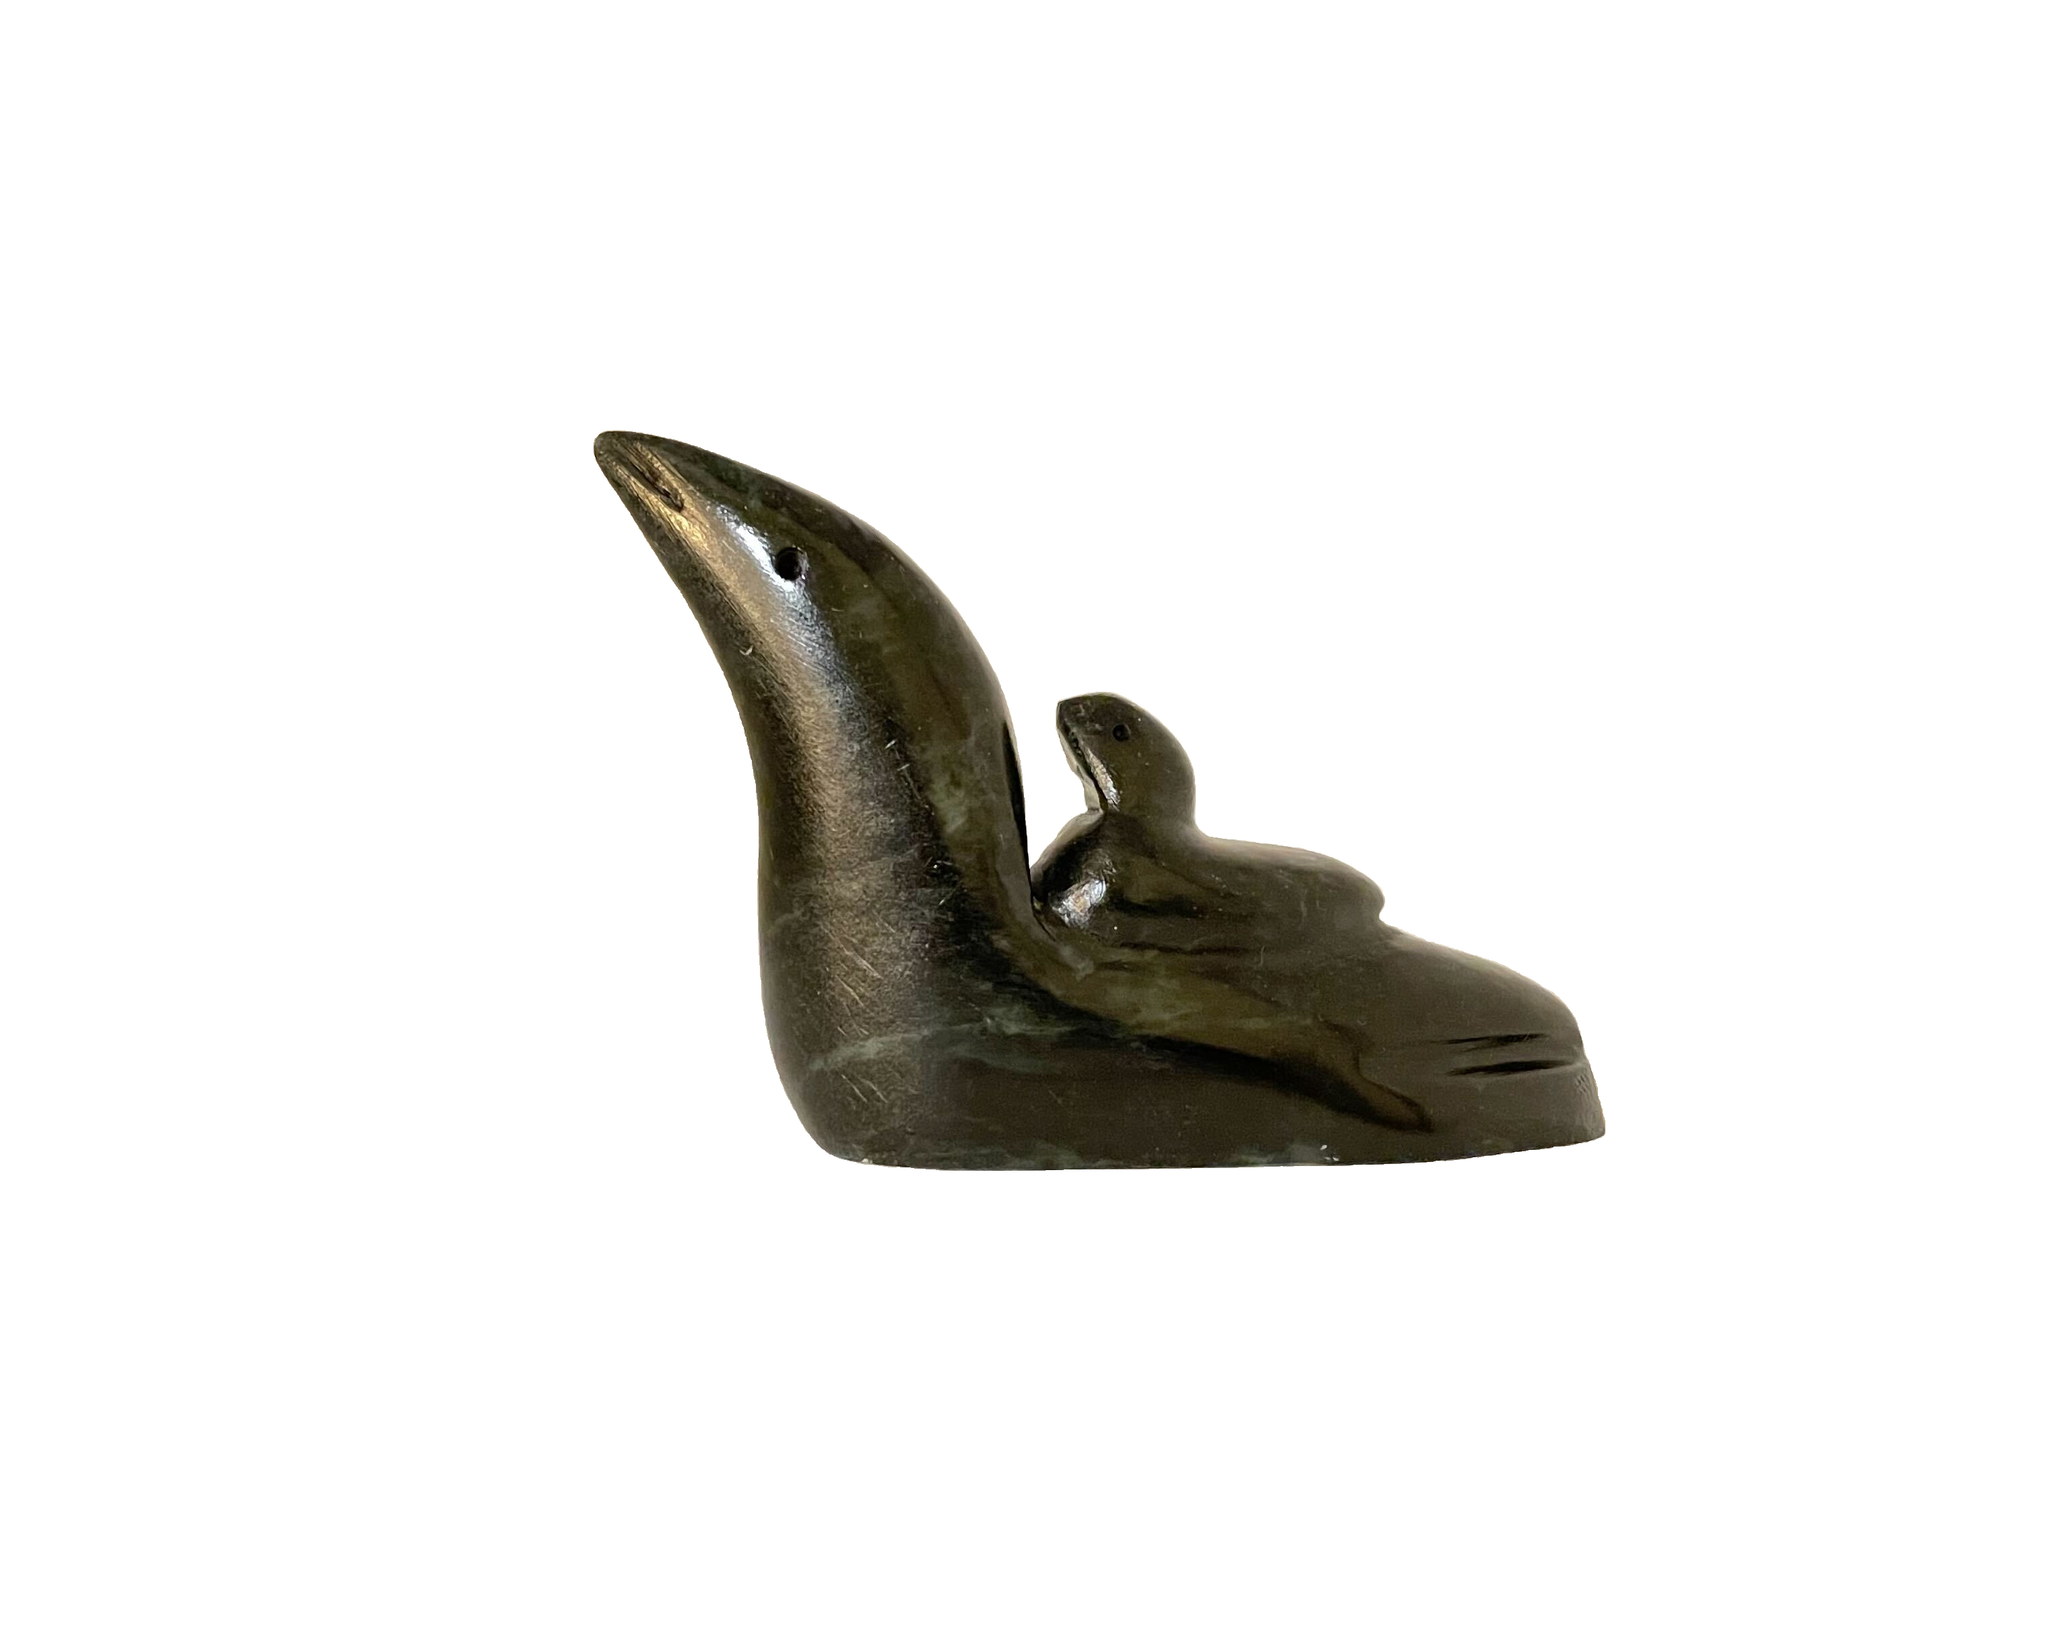 Peter Martin Loon with Chick Soapstone Sculpture